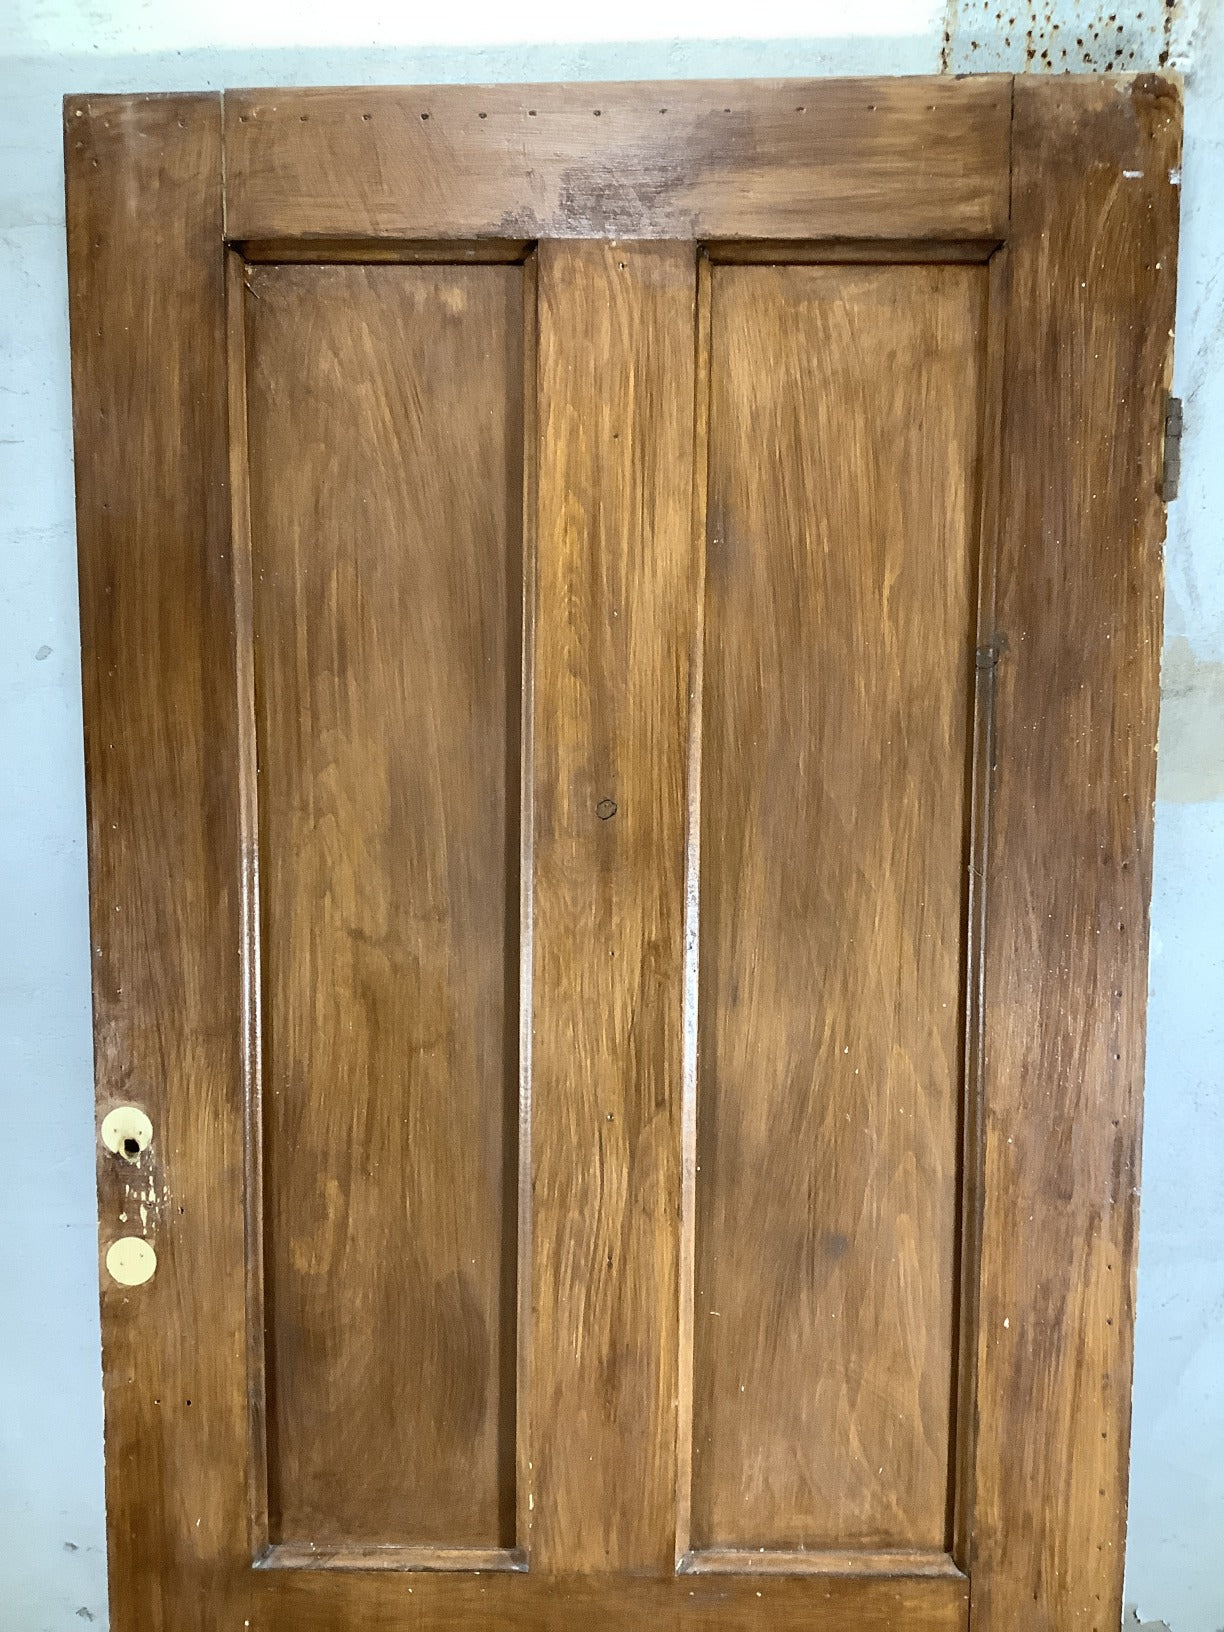 27 3/4"X75 1/4" 1930s Internal Stained Pine Four Panel Door 2over2 Reclamation